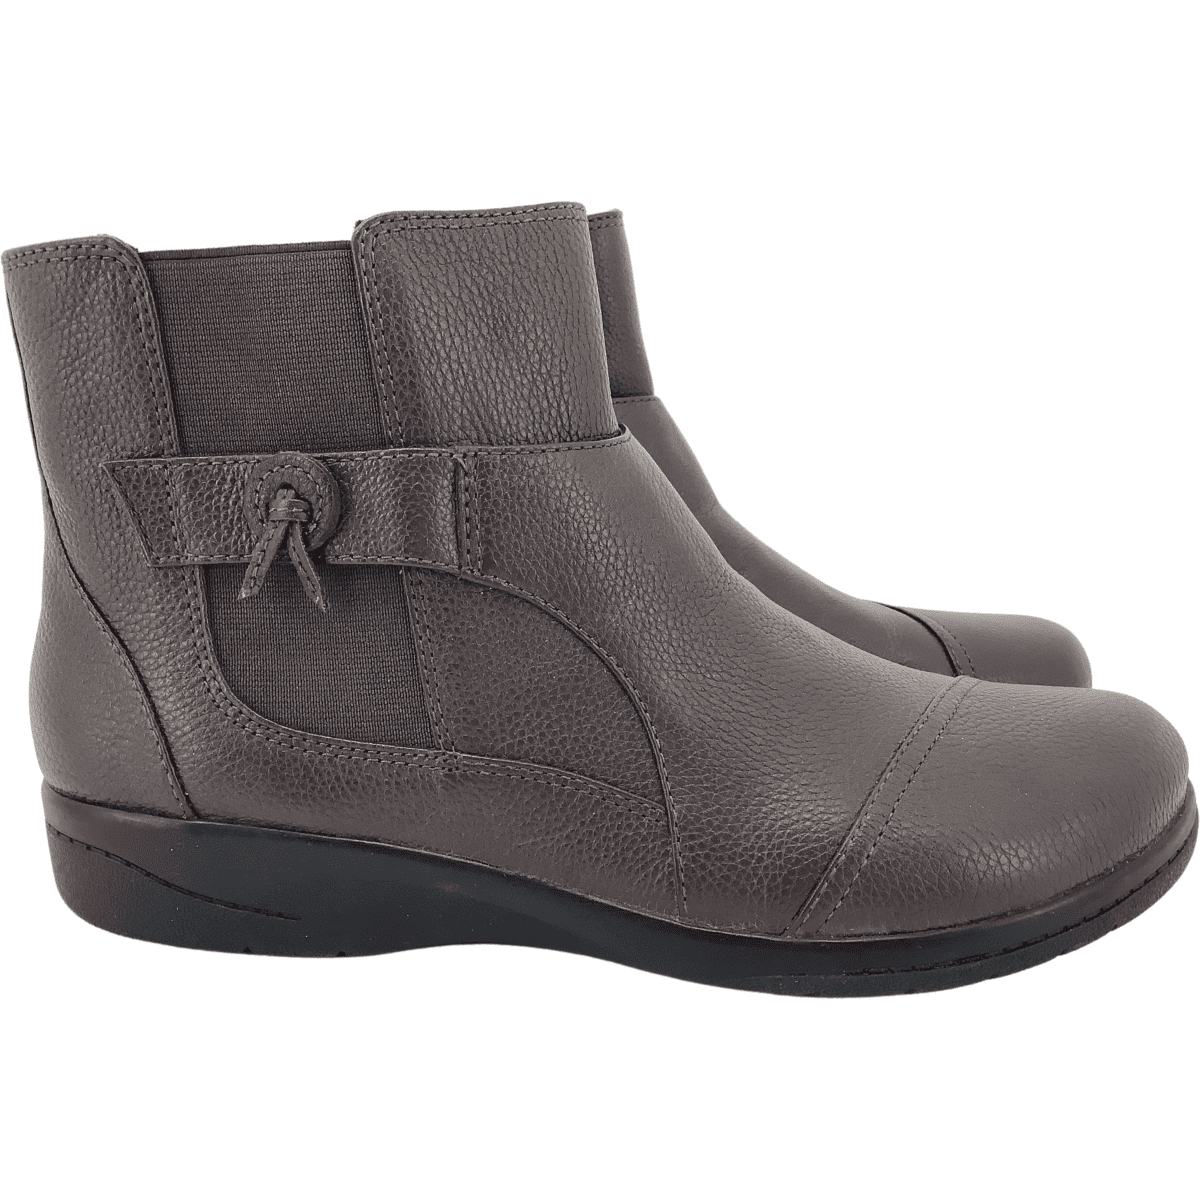 Clarks Brown Leather Boots2